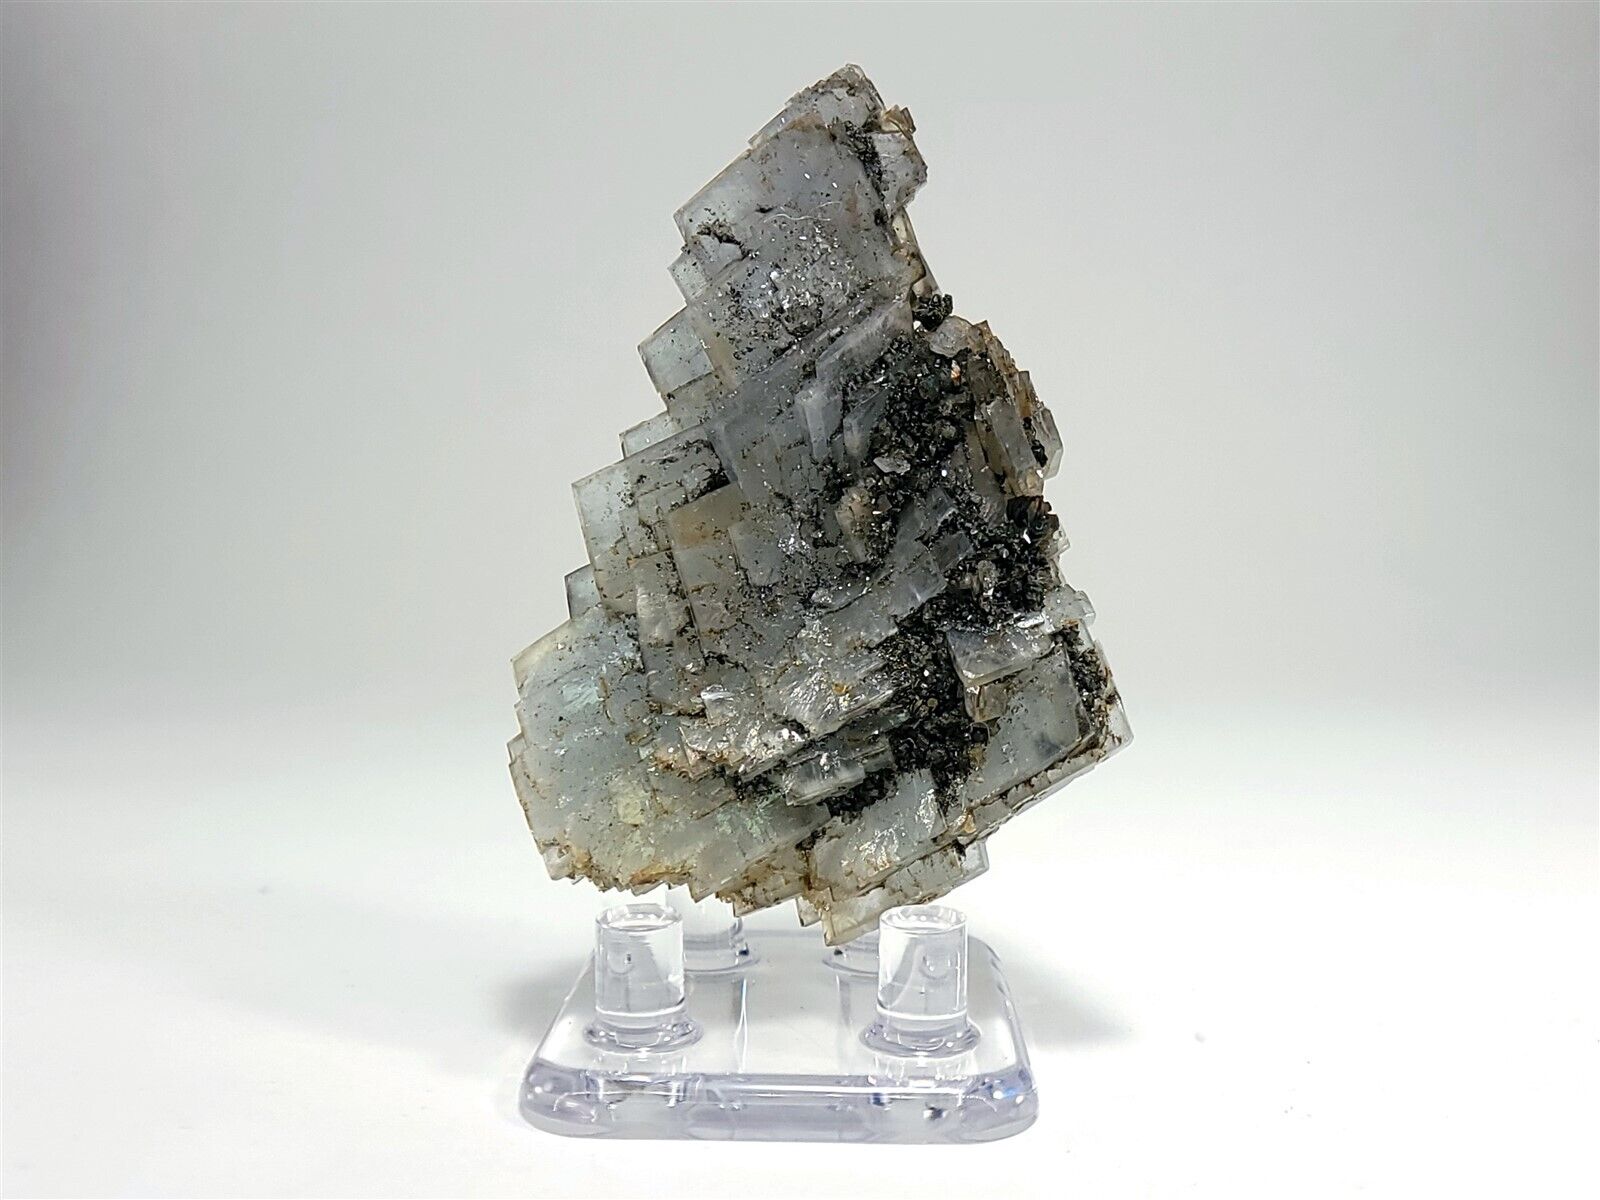 Light Blue Floater Barite Crystal with Parallel Twinning